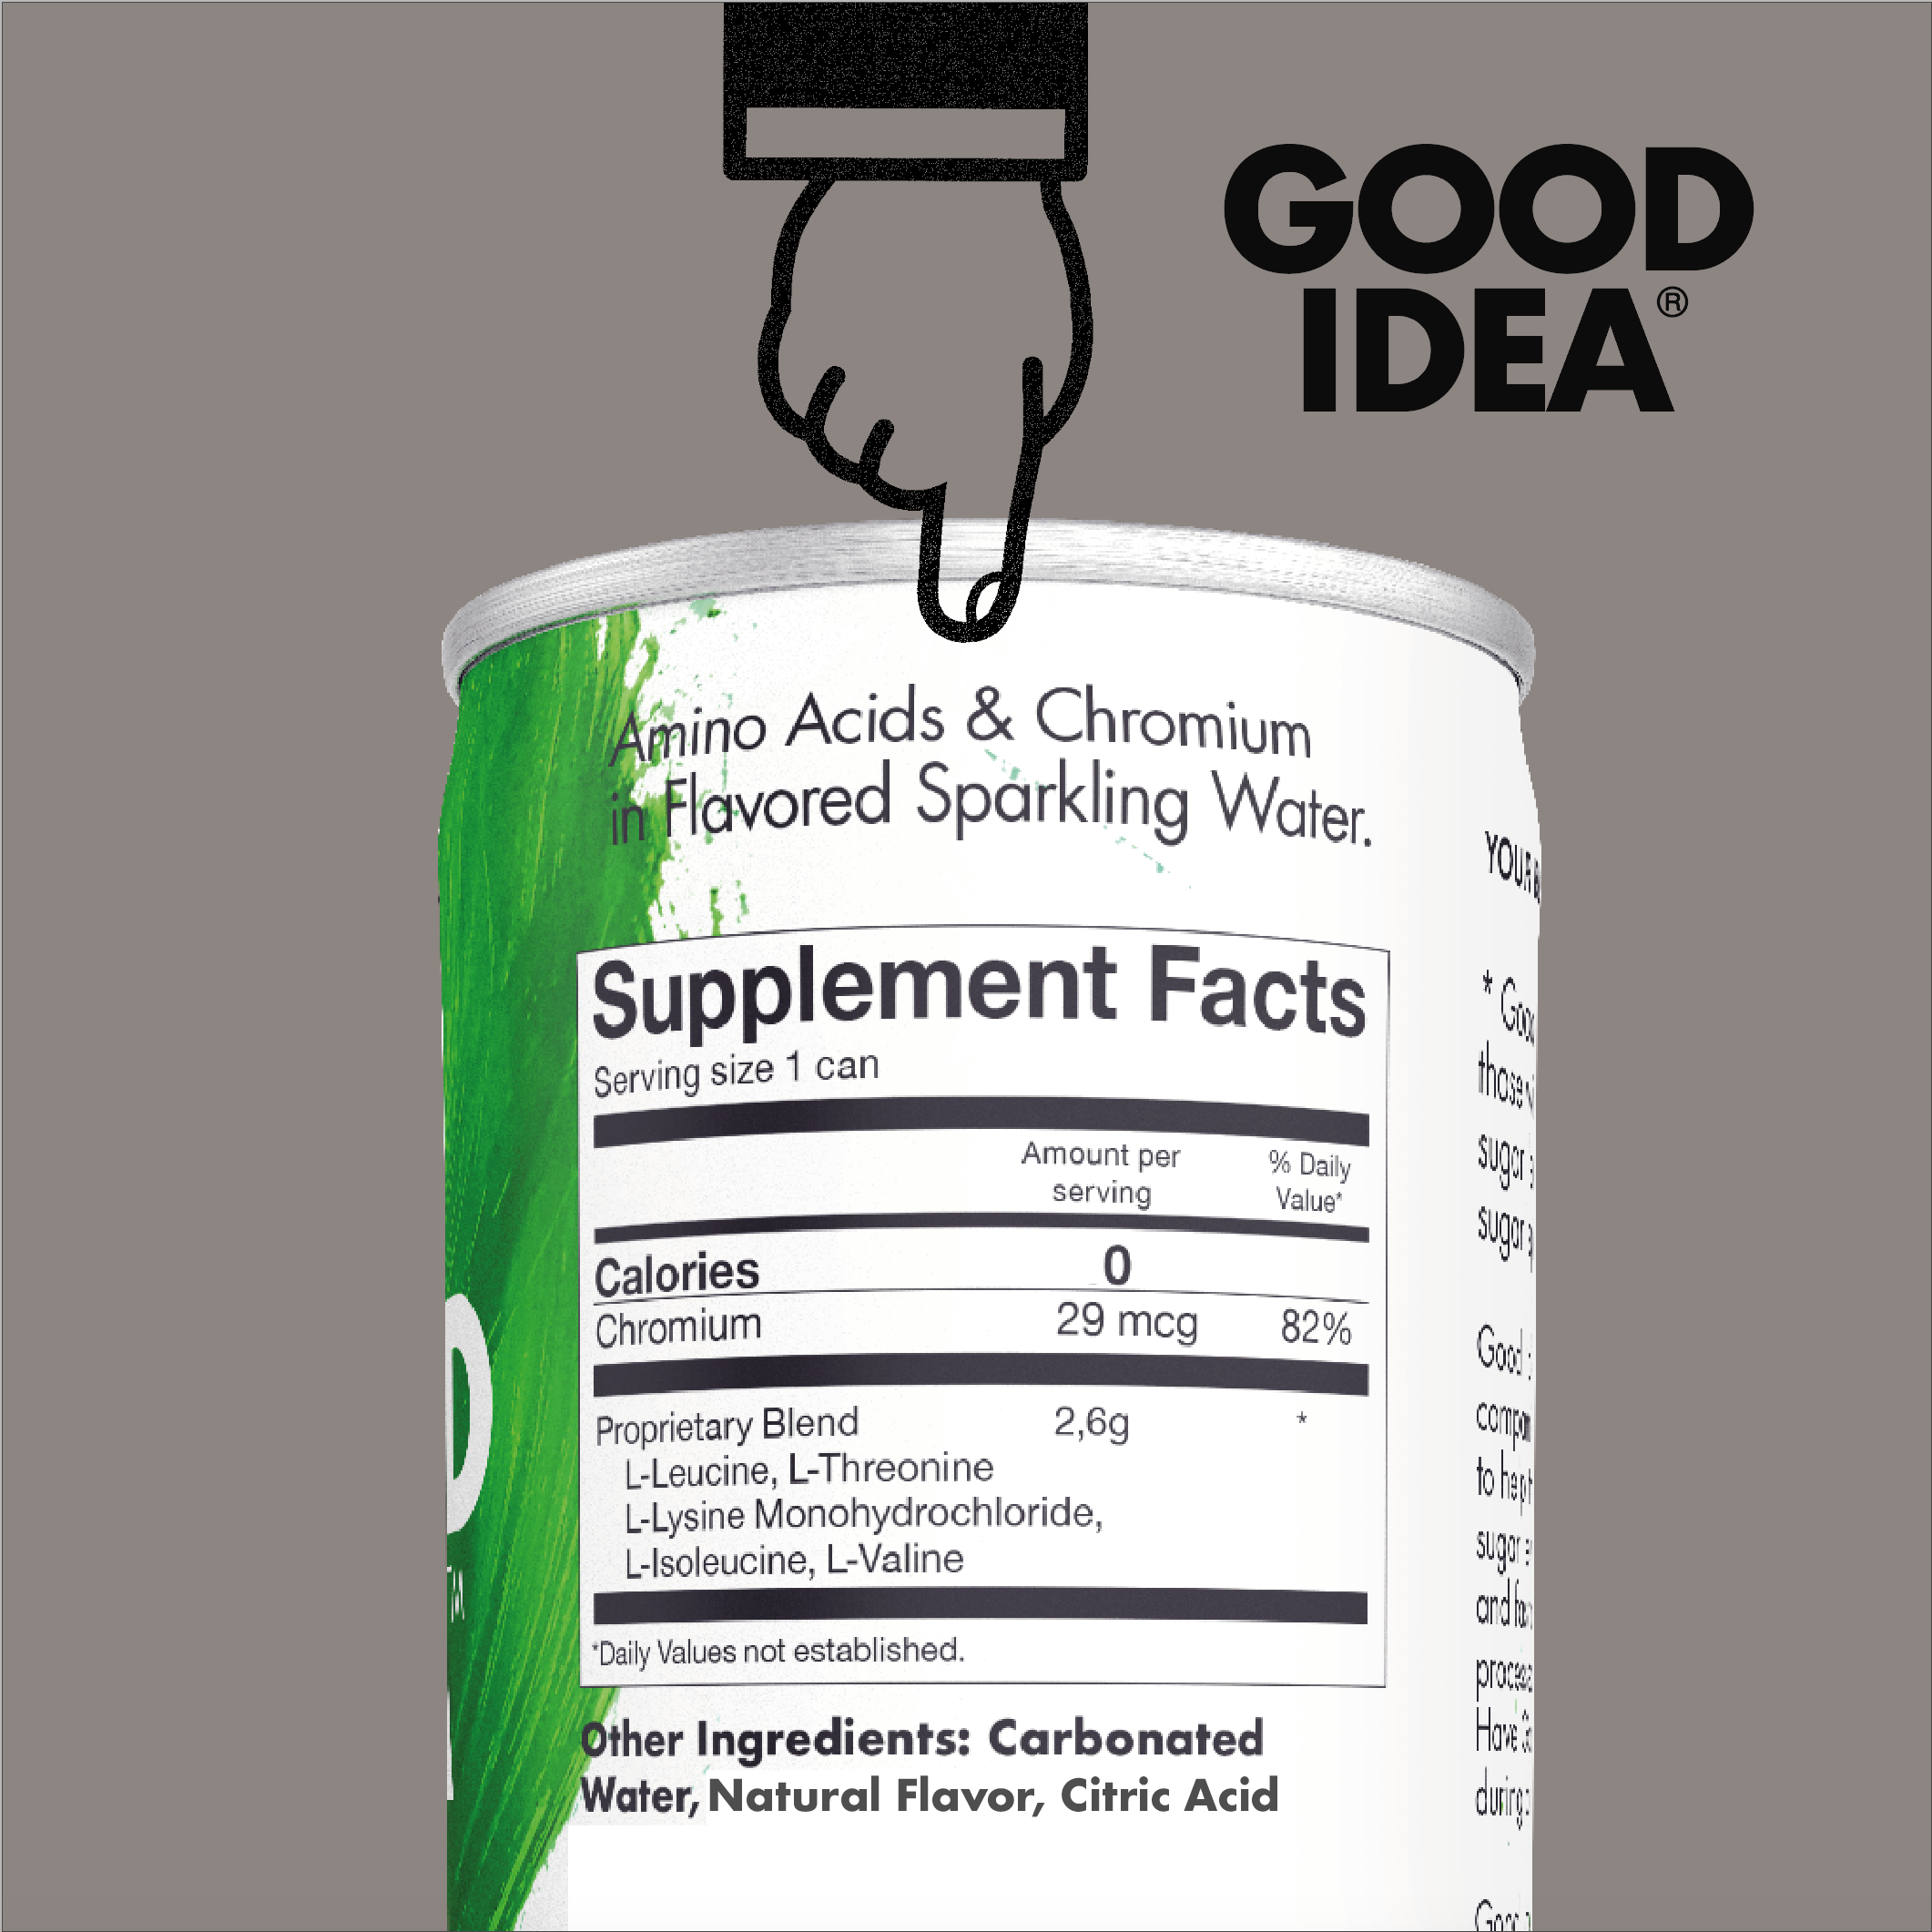 SOLD OUT! Cut your sugar spikes* - Good Idea® 12 Count Sparkling Variety Pack. Now with an Introductory Offer!